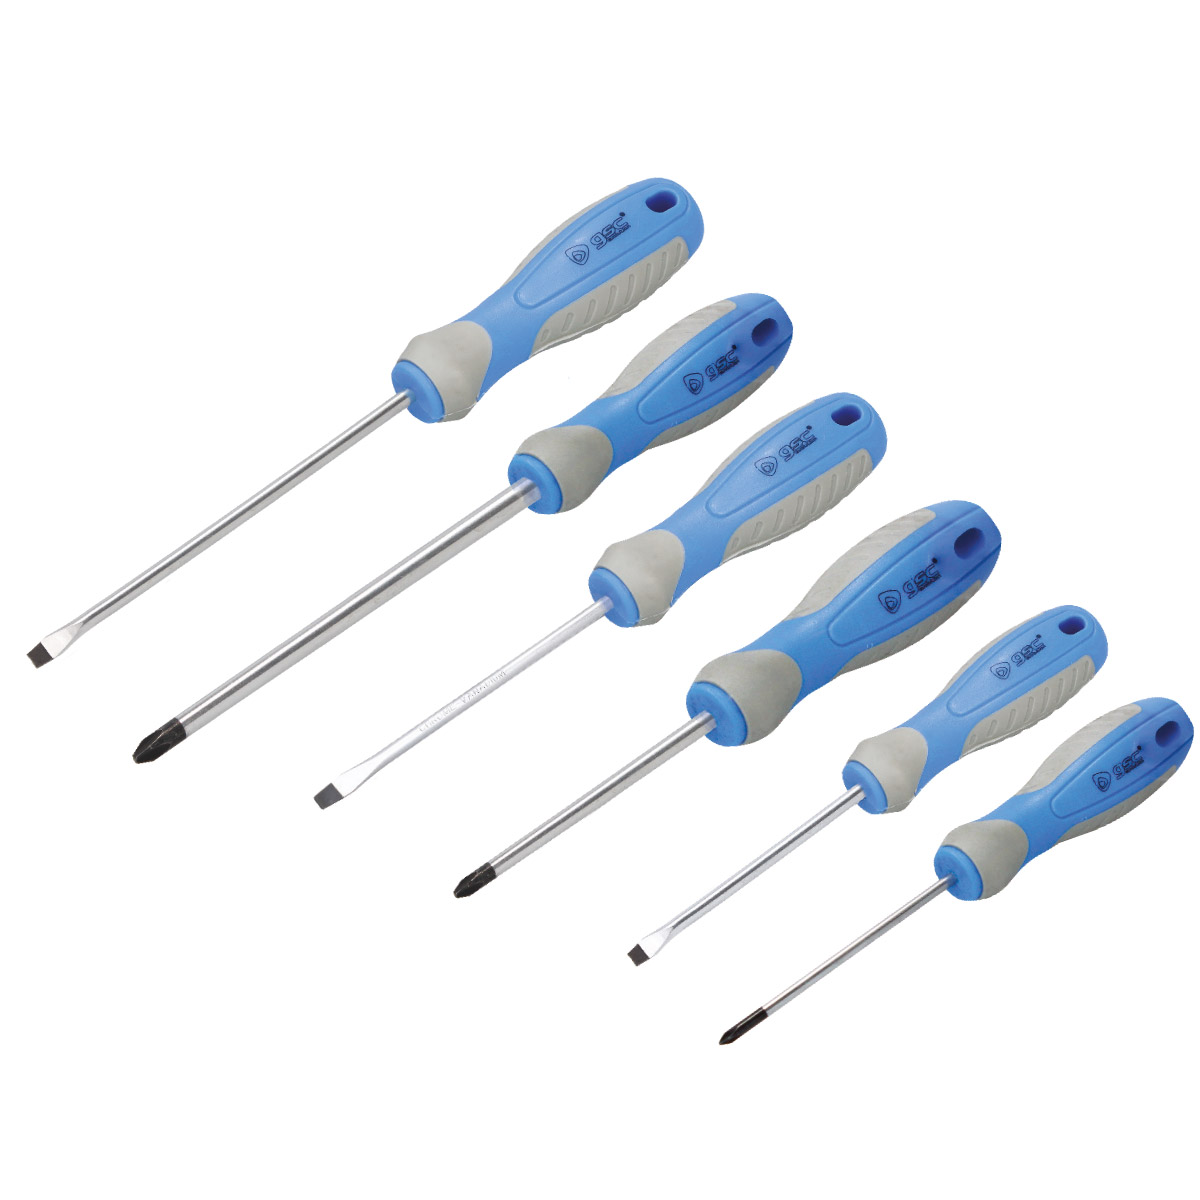 Set of 6 screwdrivers - 3 flat and 3 Philips